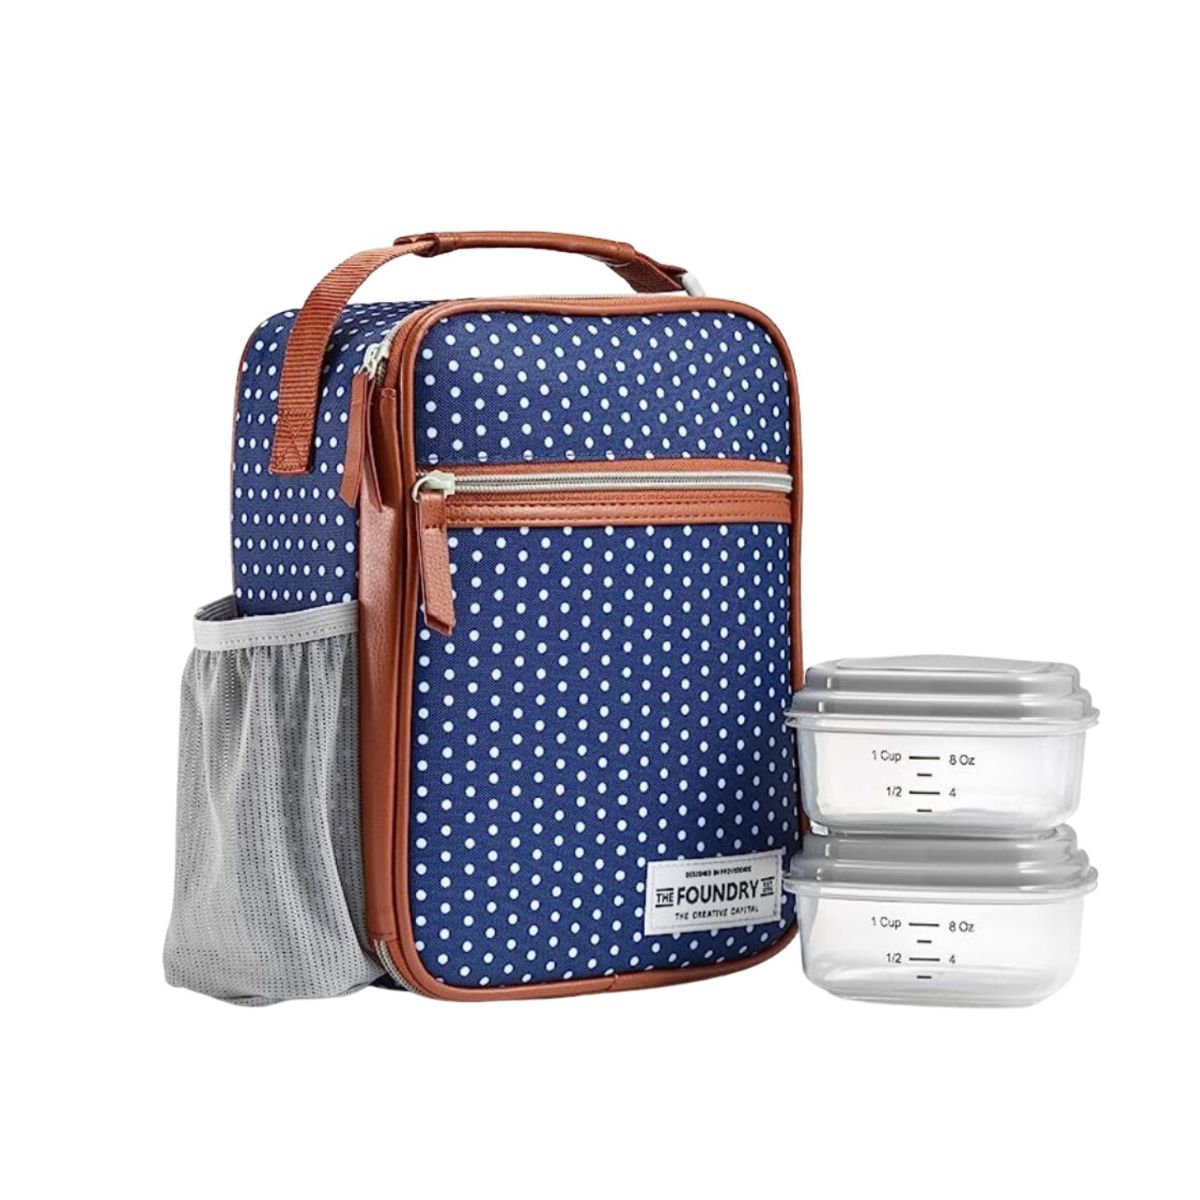 Blue and white polka dot lunchbox with brown trim